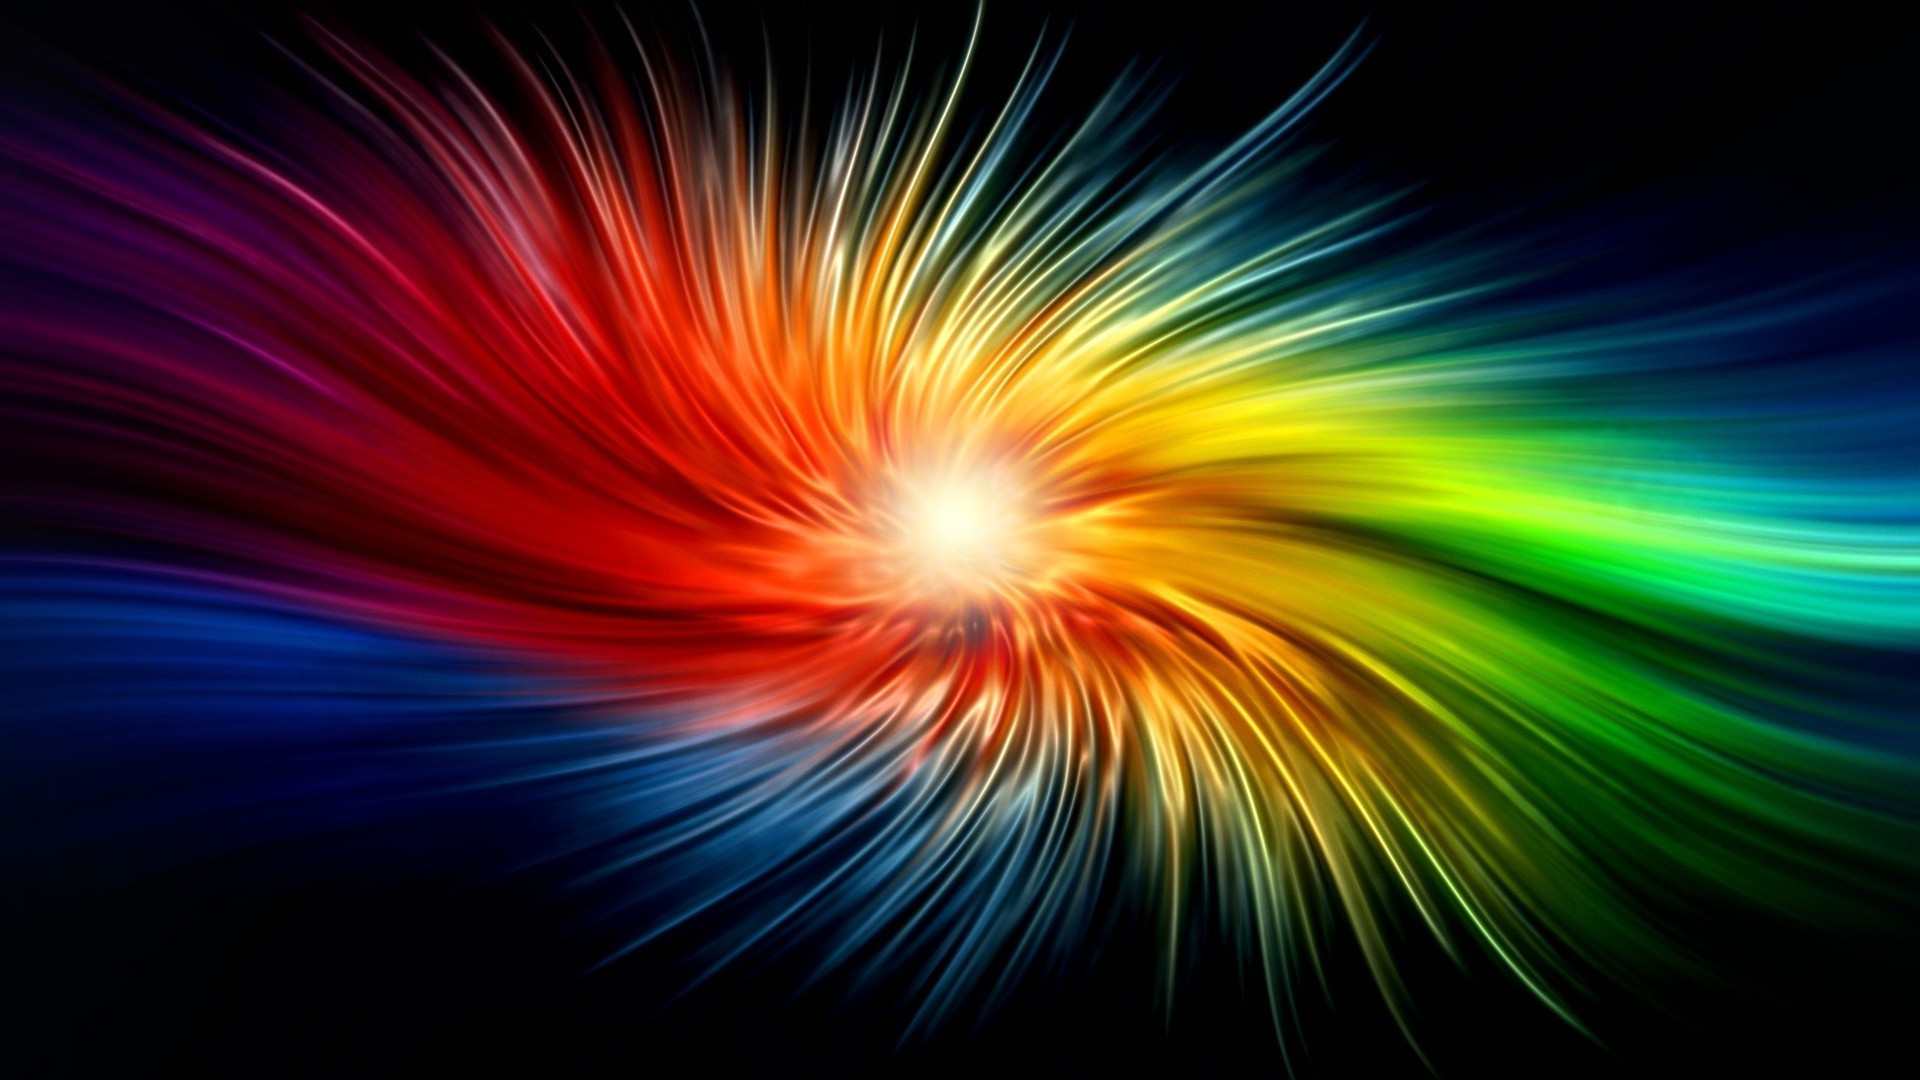 neon blur bright abstract light explosion wallpaper flame energy shining graphic design luminescence dynamic magic